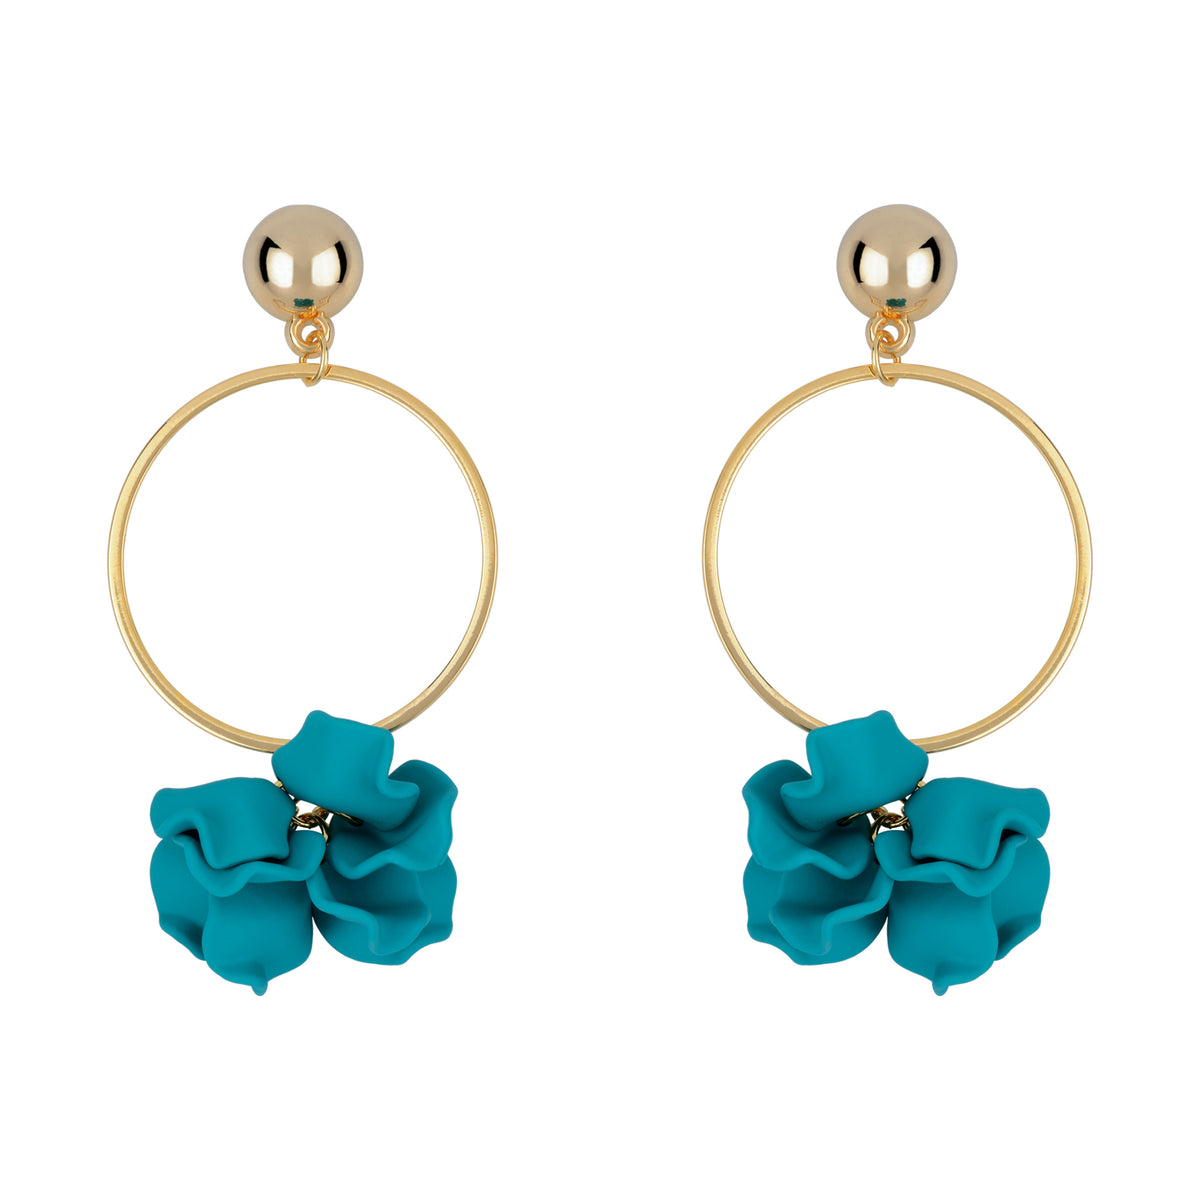 Suspended Gold Ring Petal Earrings - Turquoise